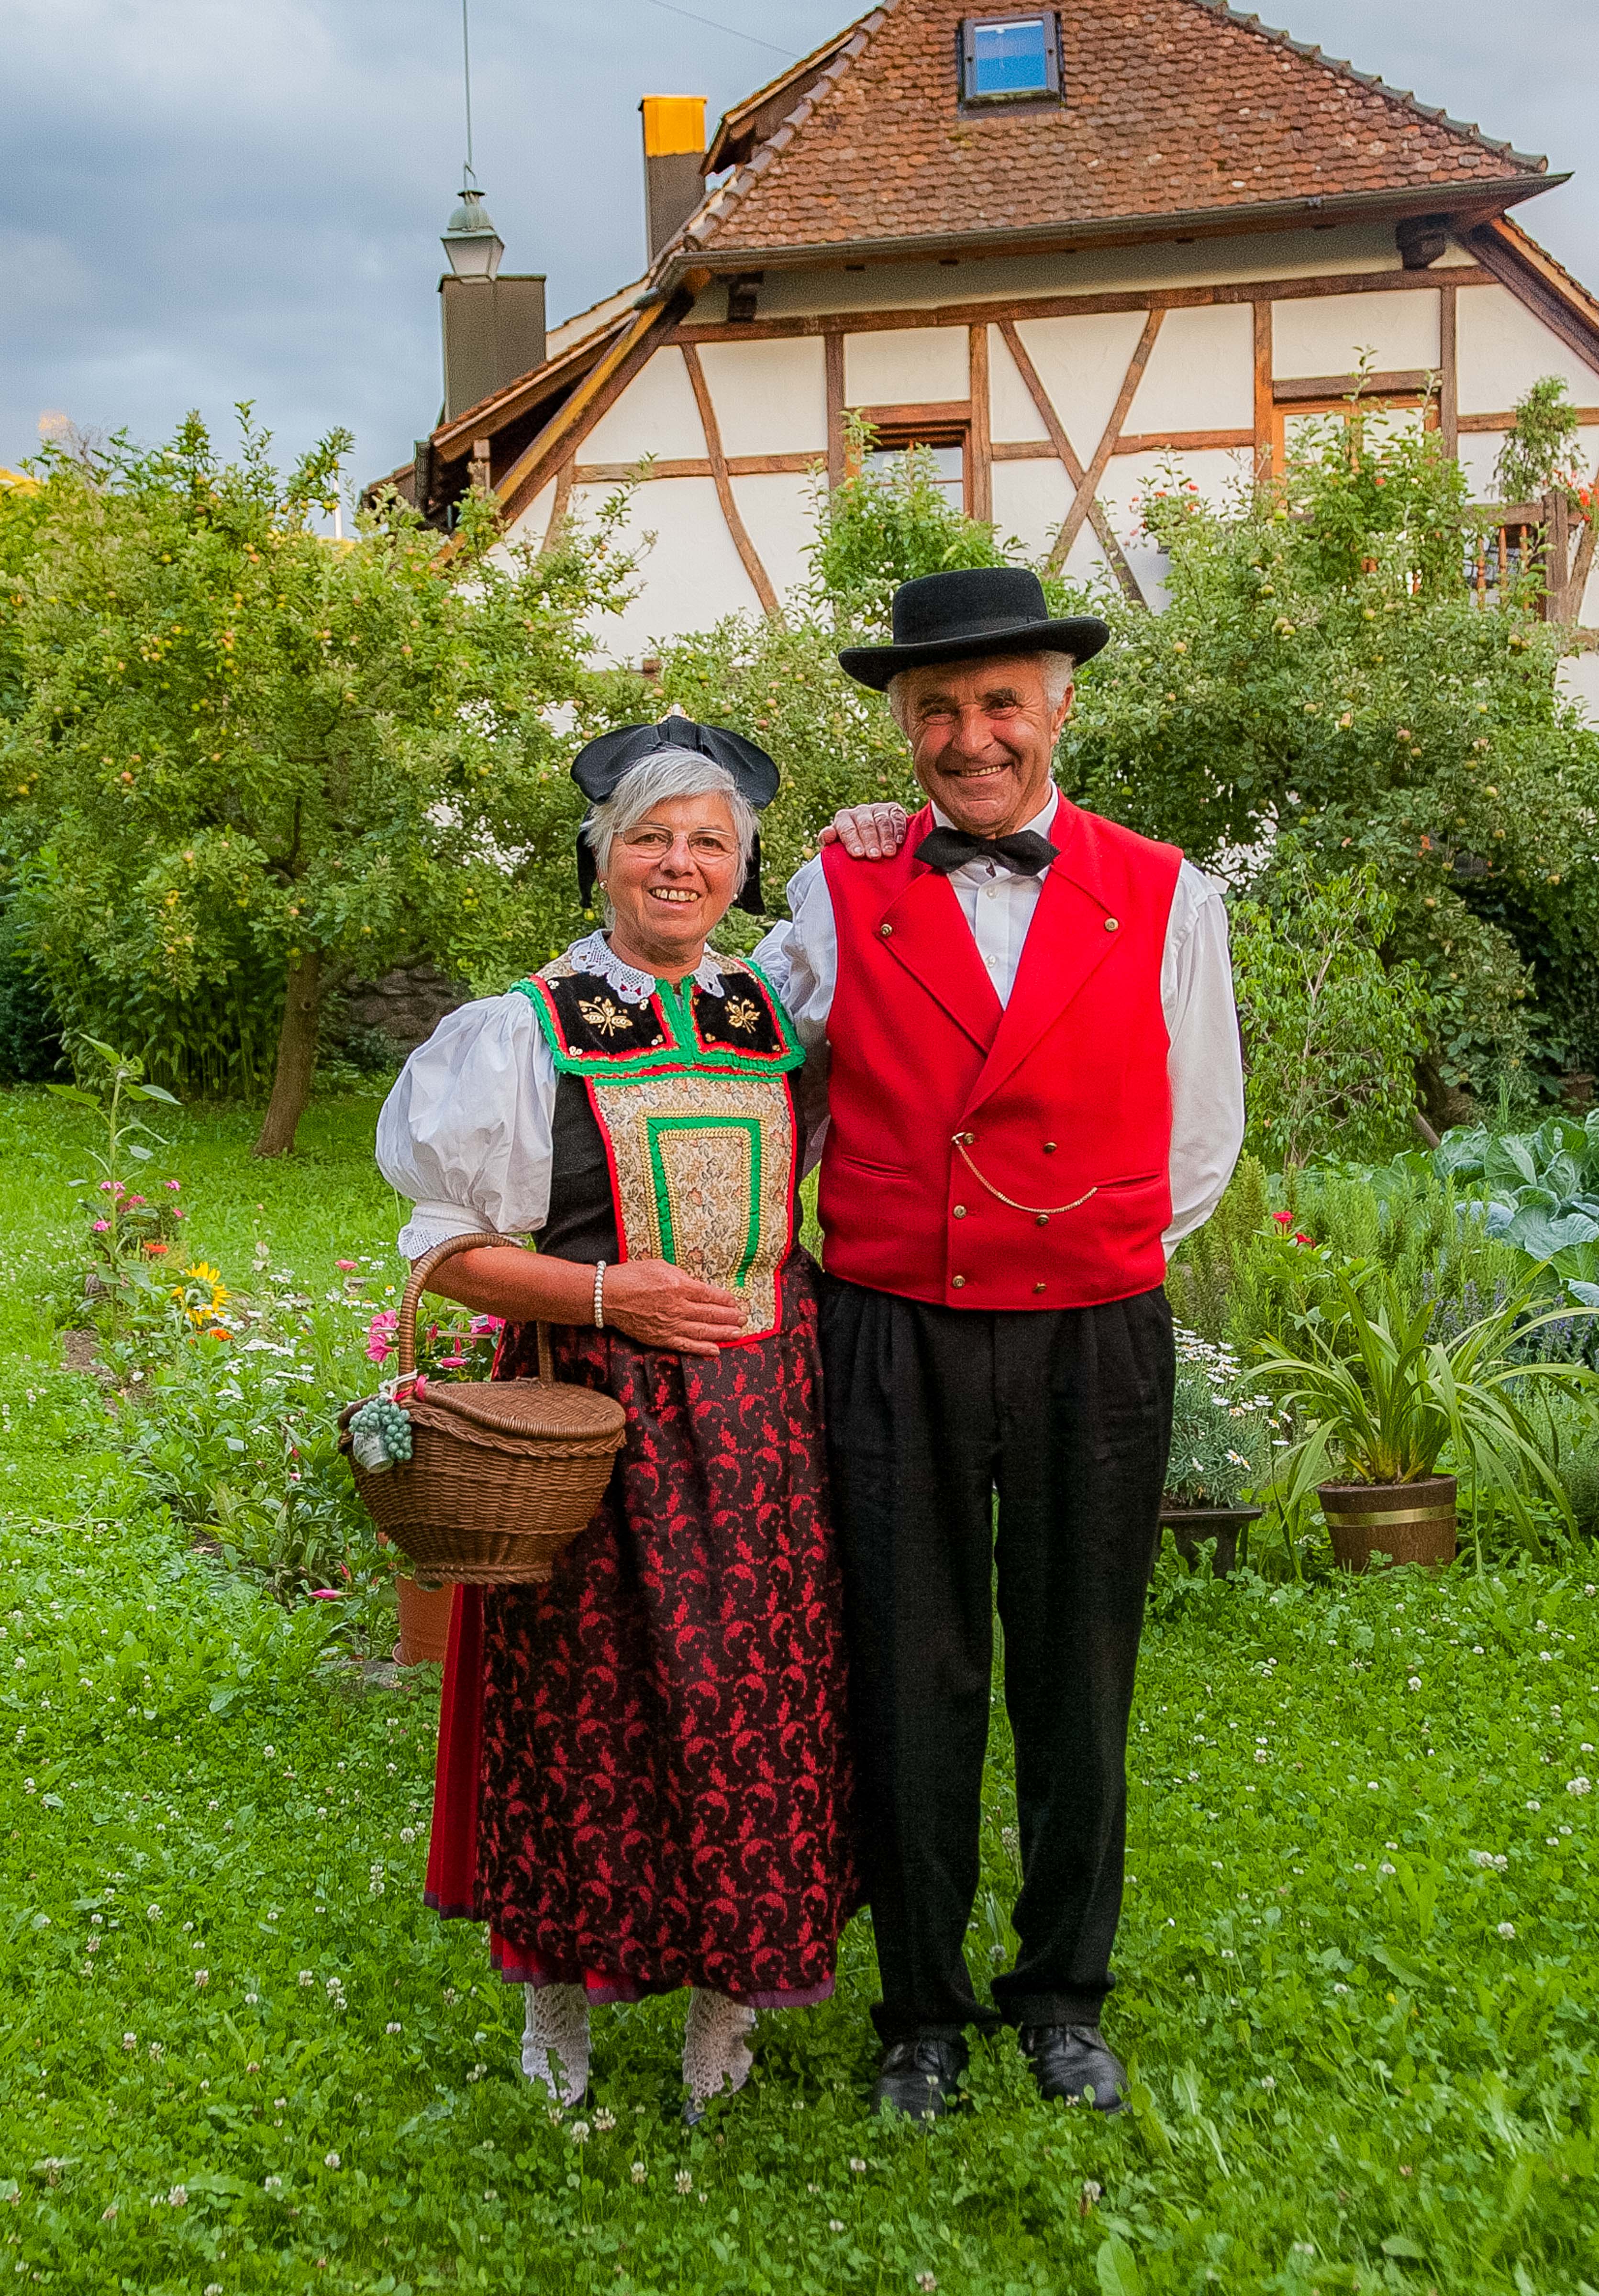 Germany, Baden-Wurtenburg Province, Traditional Clothes, 2008, IMG_6087